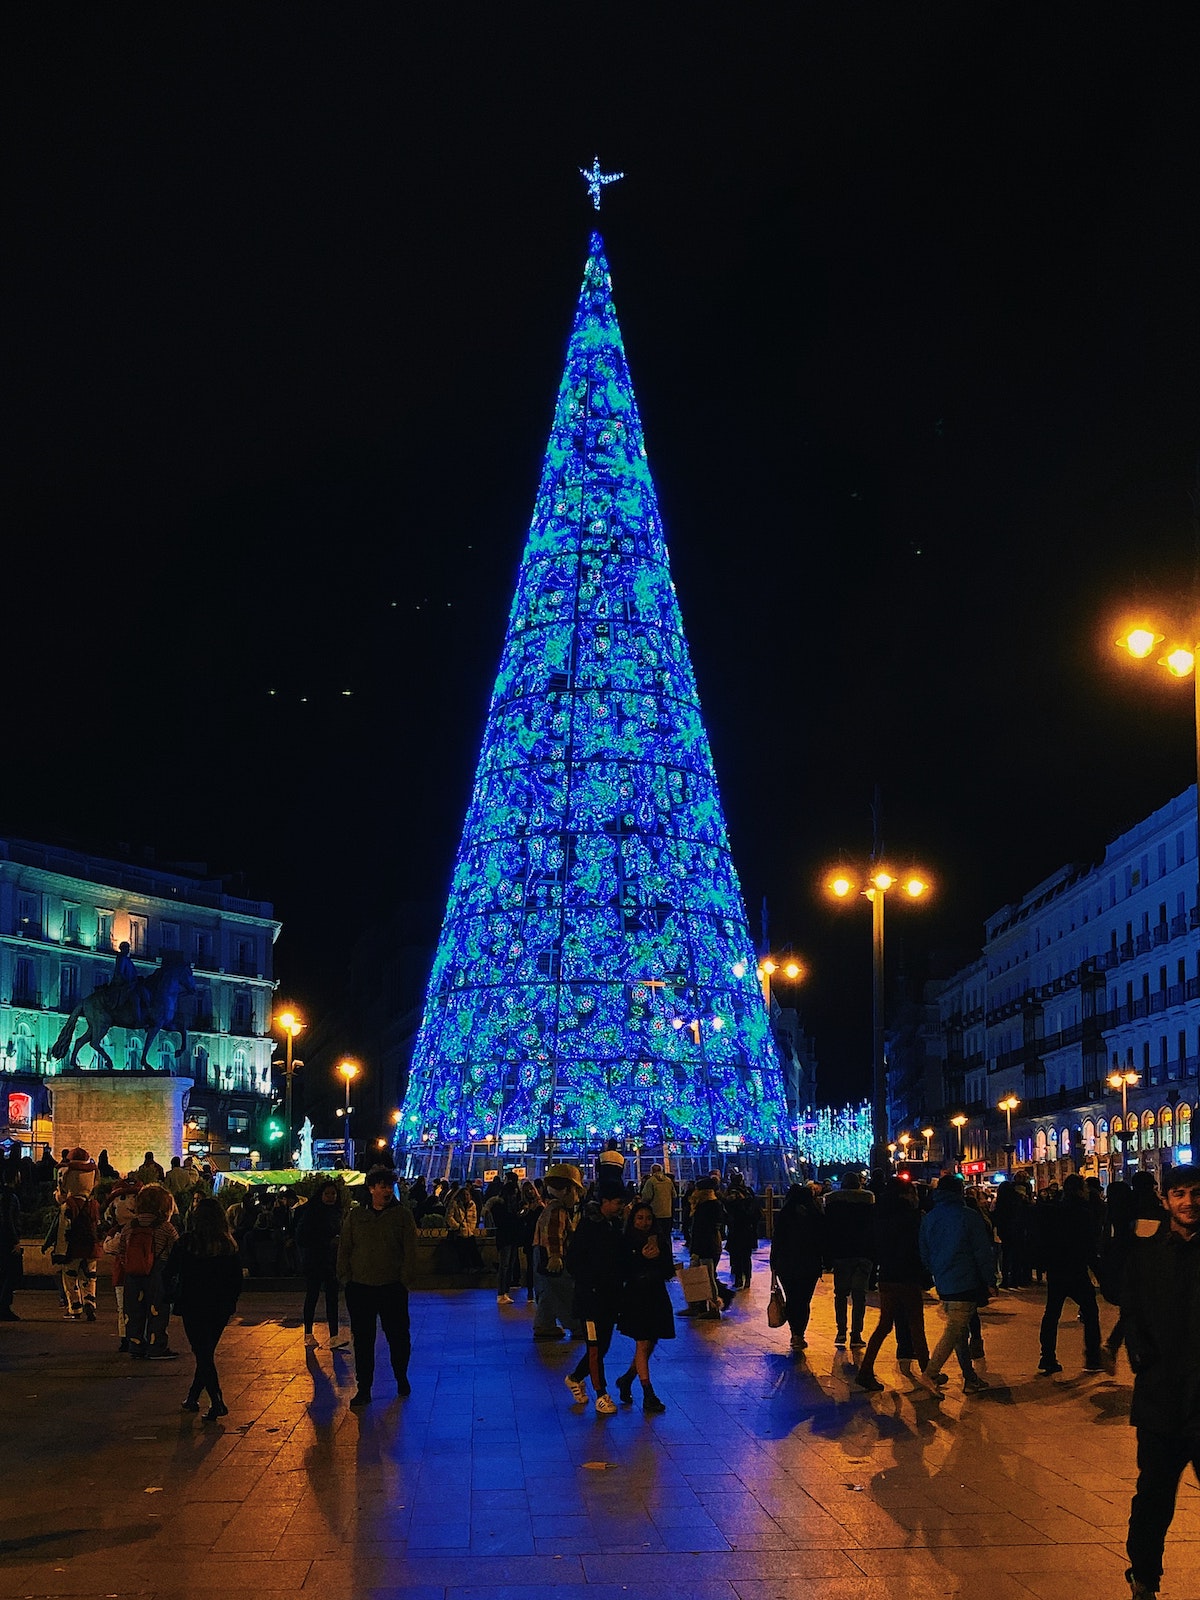 Large blue Christmas tree in a city plaza at night